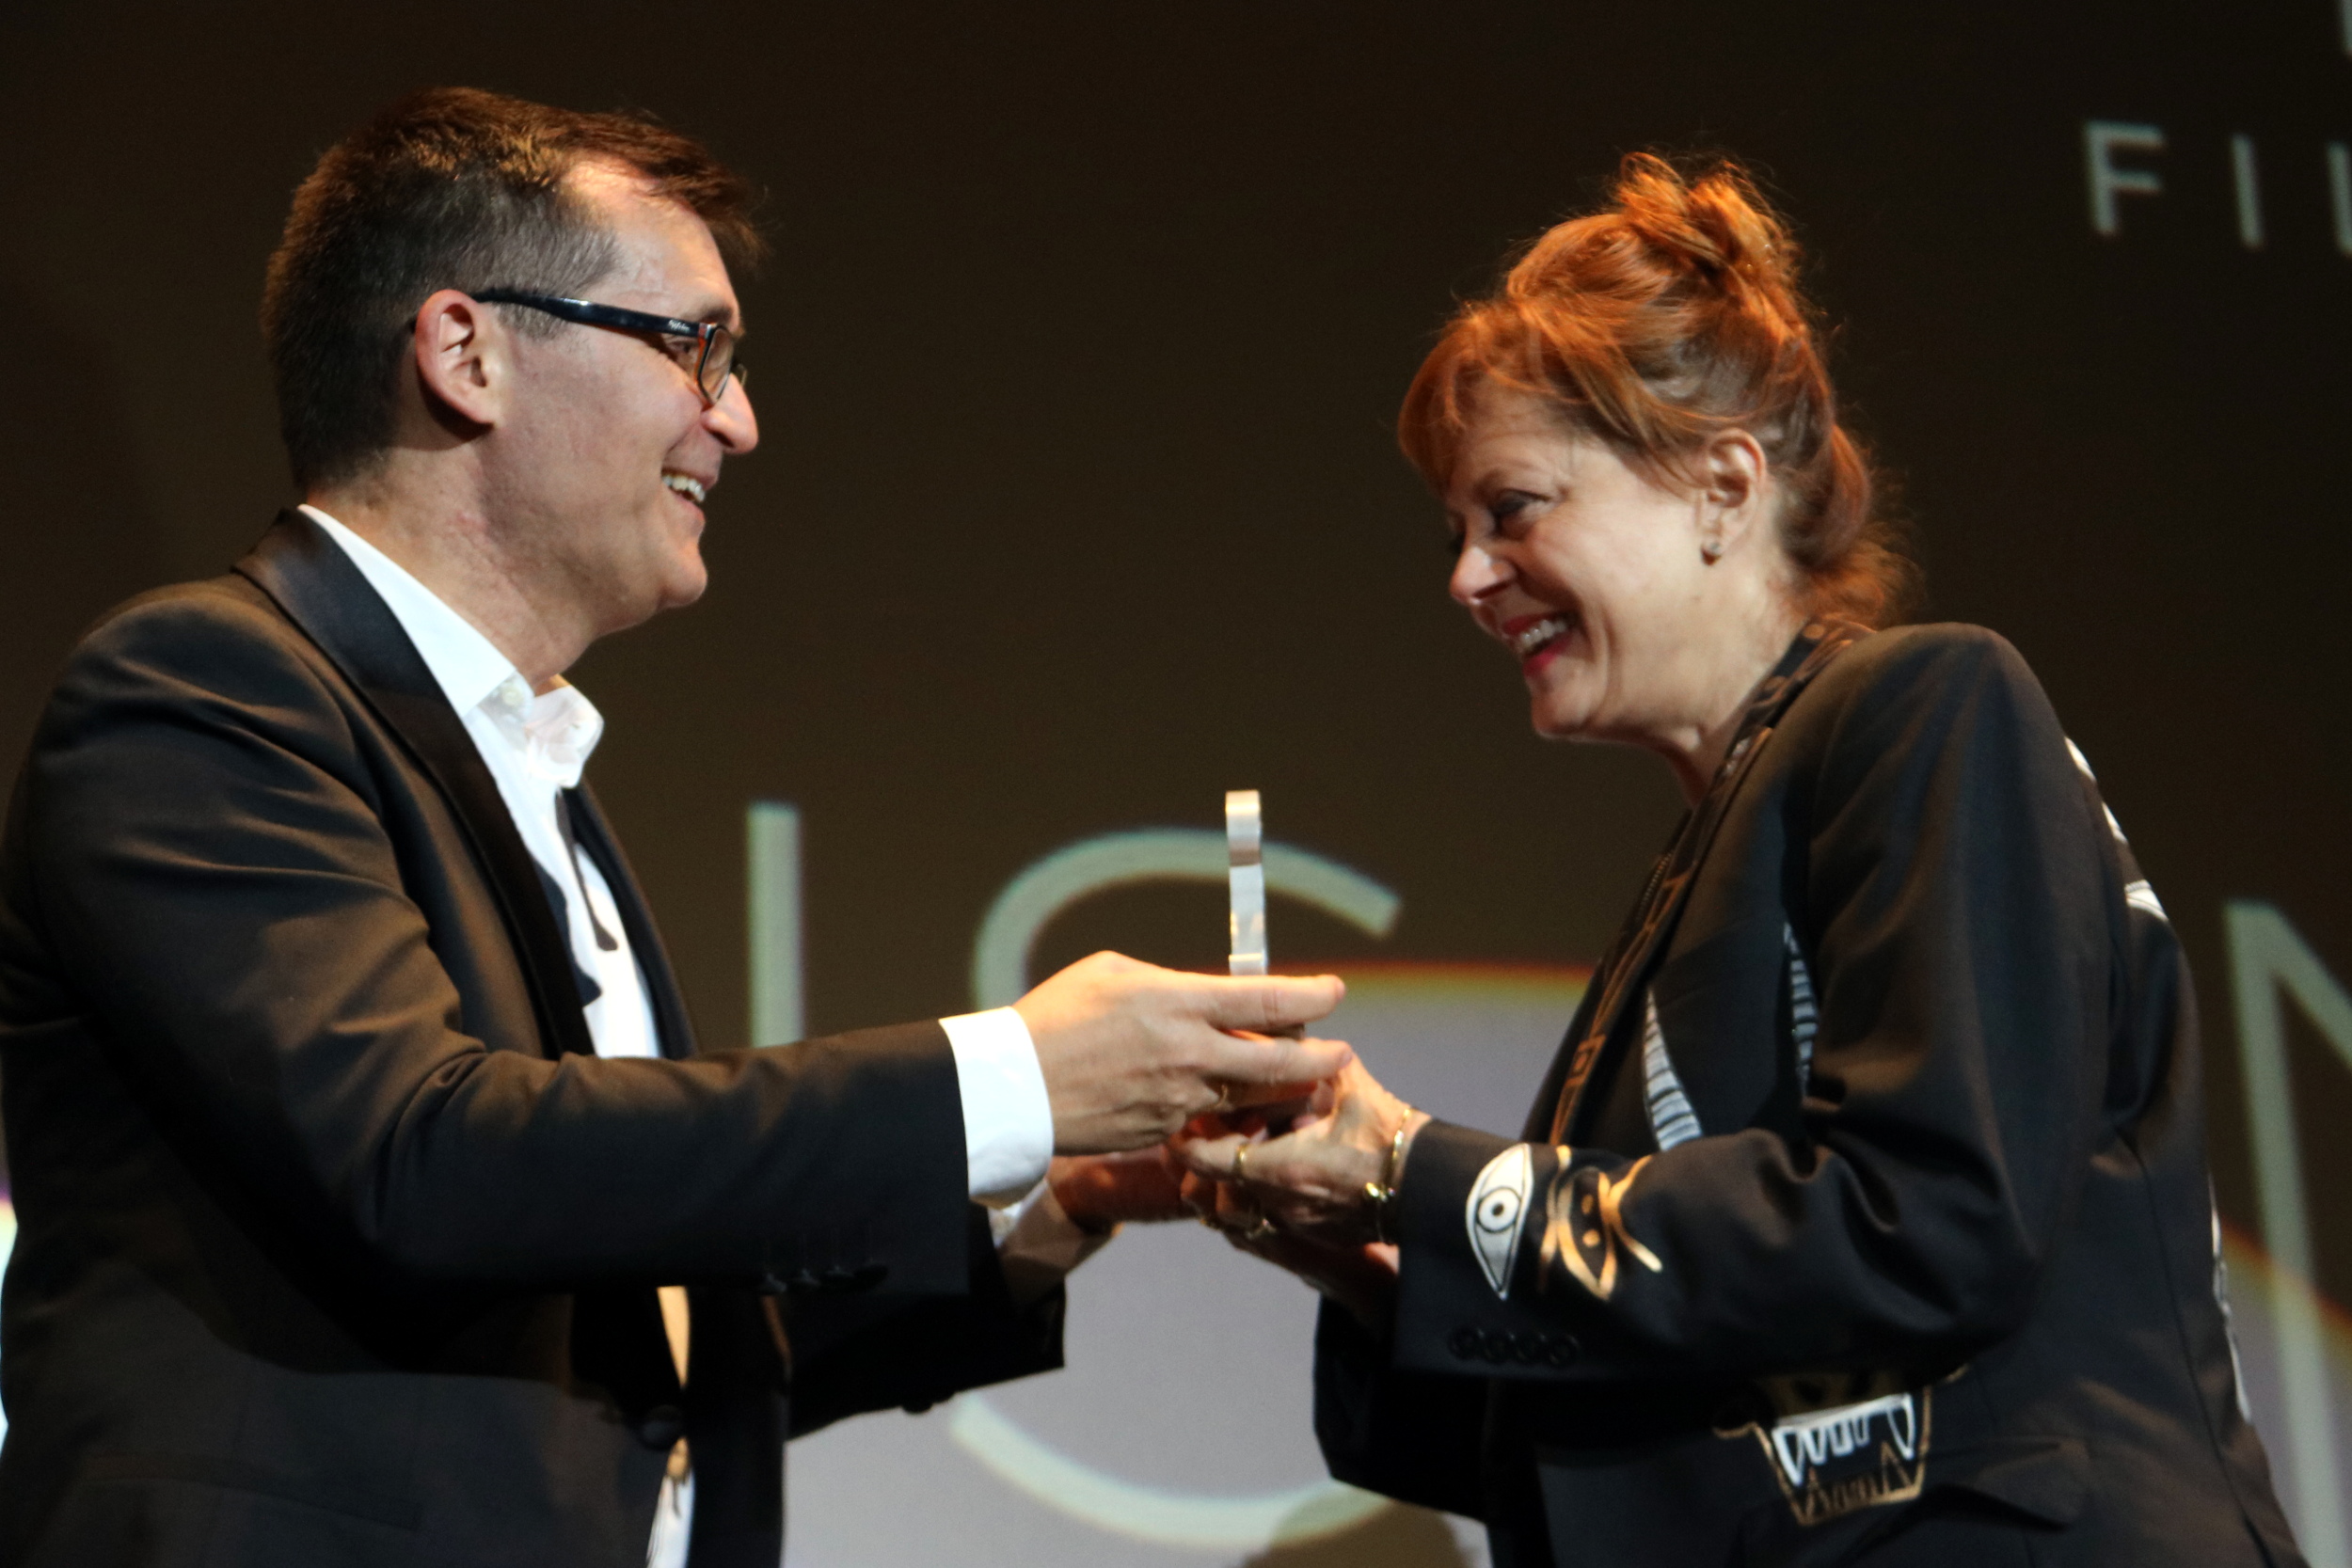 Susan Sarandon accepting the Grand Honorary Award from director of the Sitges Film Festival Àngel Sala, Sunday 8 October